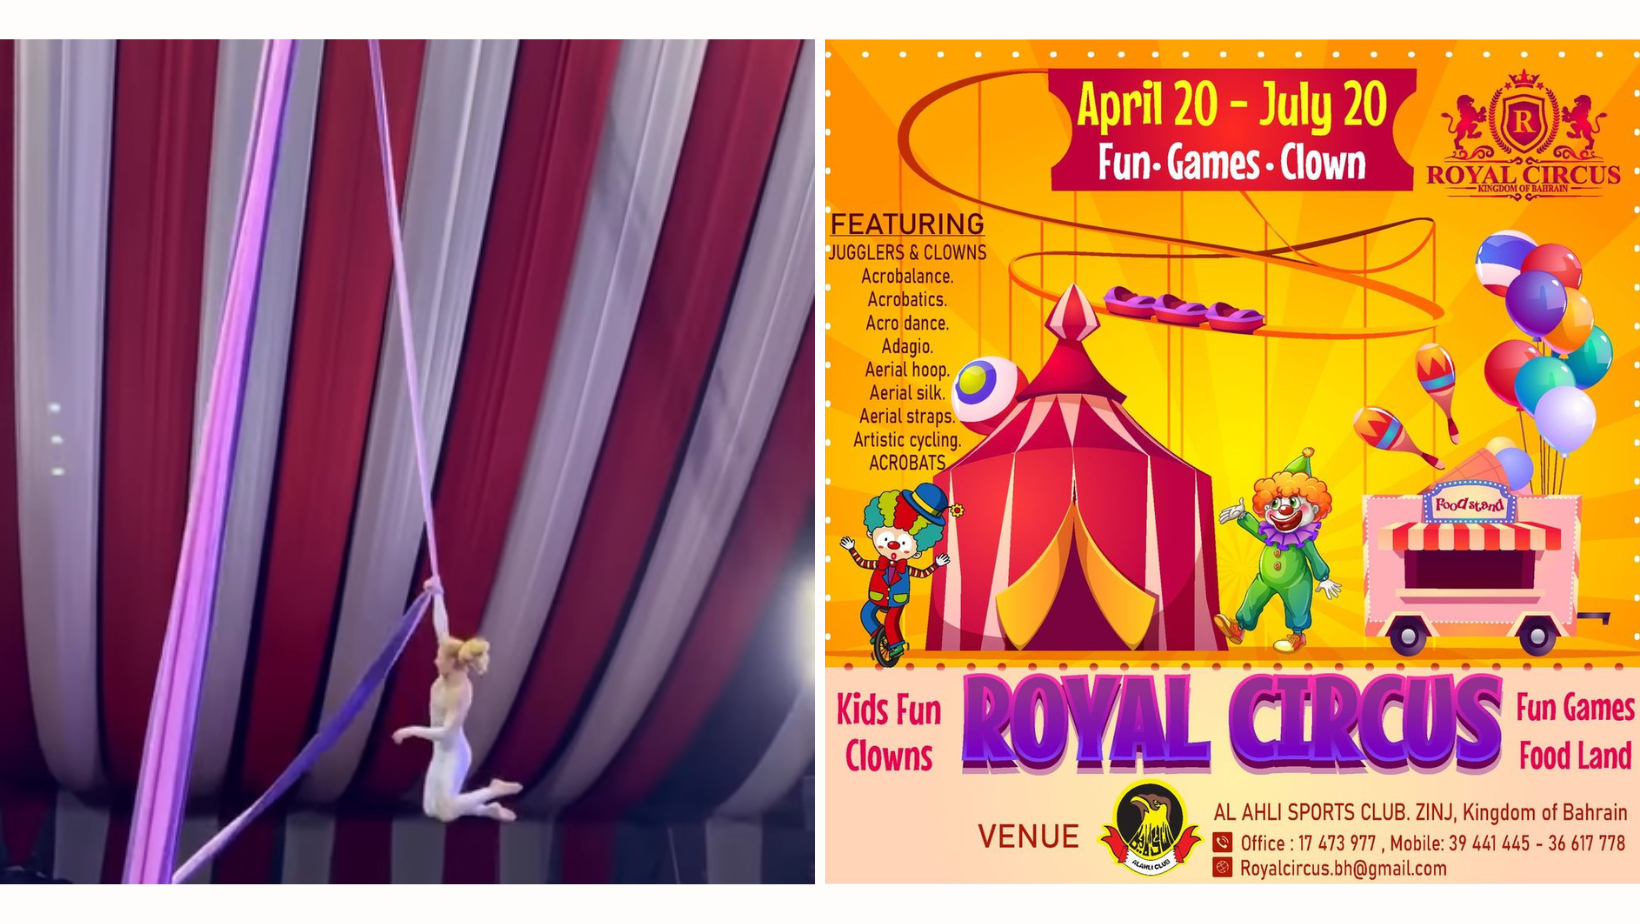 Royal Circus, Bahrain, entertainment, shopping, contests, family fun, Al Ahli club, Suqaya, Manama, 21 April, 21 June, show times, ticket prices, VIP tickets, regular tickets, children, inquiries, shopping area, restaurants area, games area, live performance, circus tent, circus in bahrain, royal circus, eid activities in bahrain, localbh, local bahrain